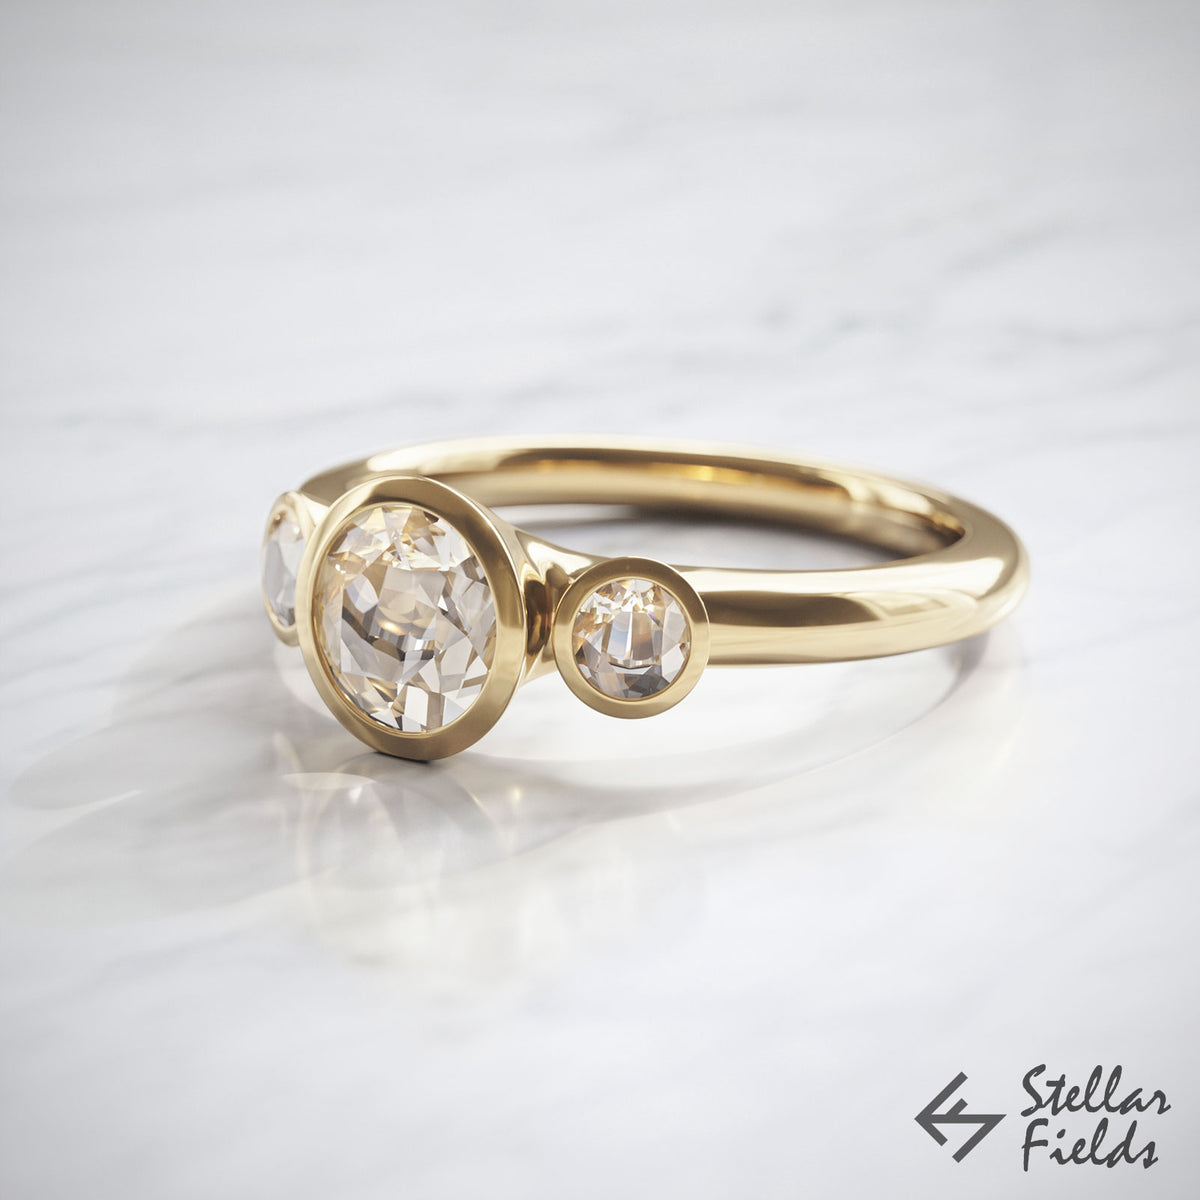 Modern Tri Stone Engagement Ring Unique Tapered Bezel Ring 14k Yellow Gold Stellar Fields Jewelry